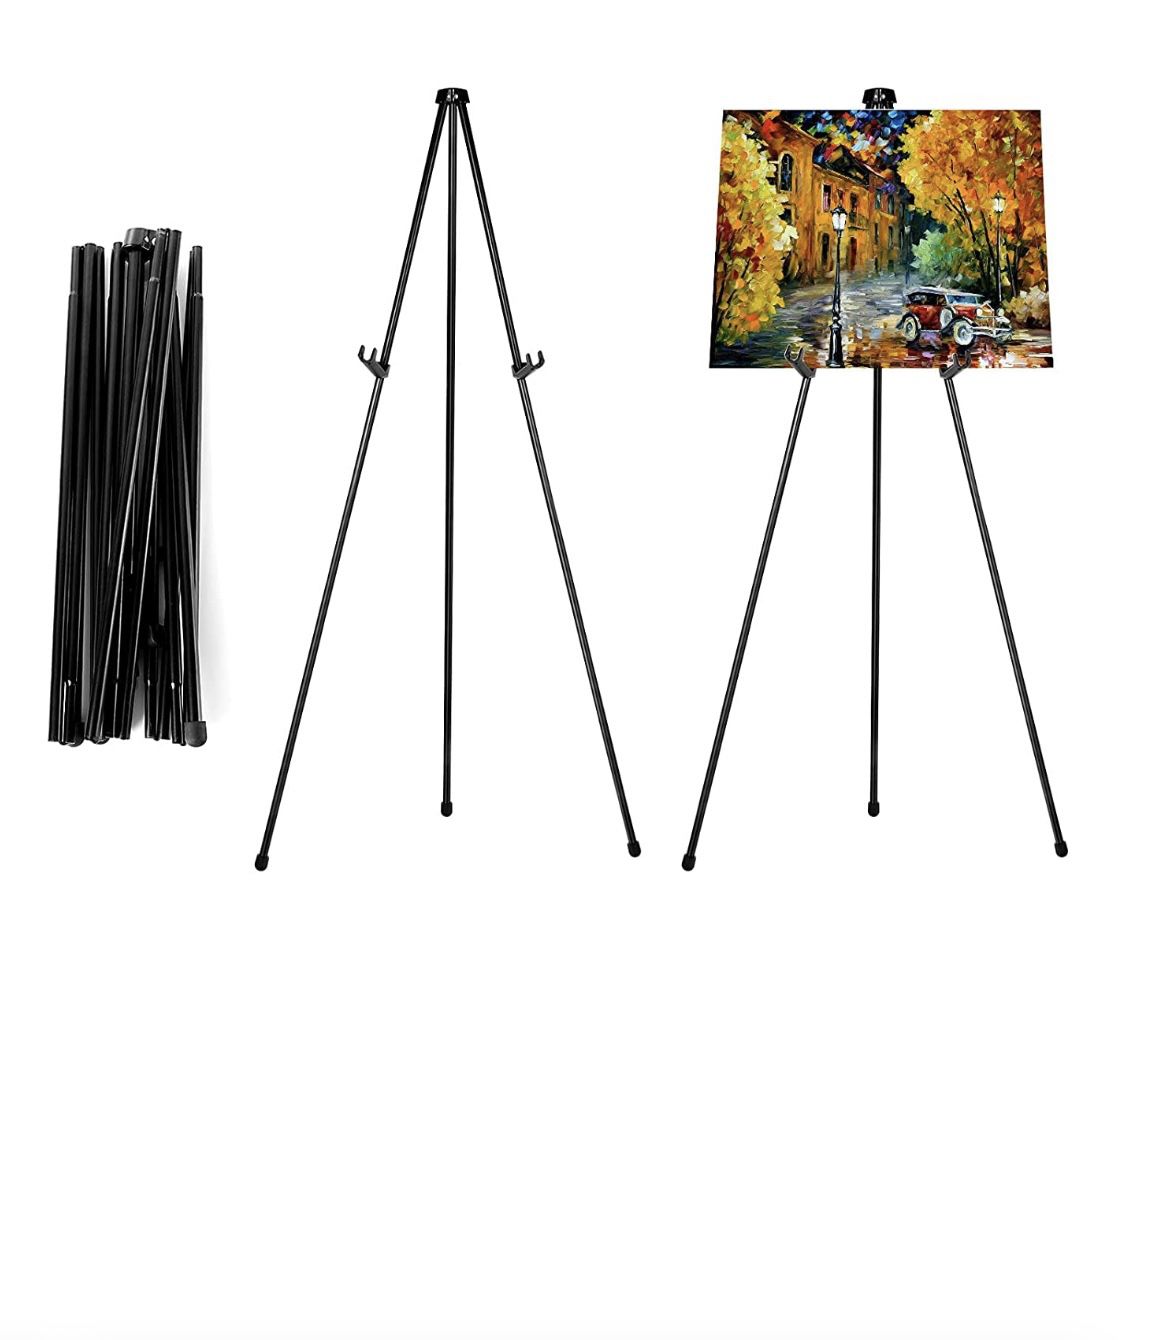 NicPro Metal Easel 2-Pack